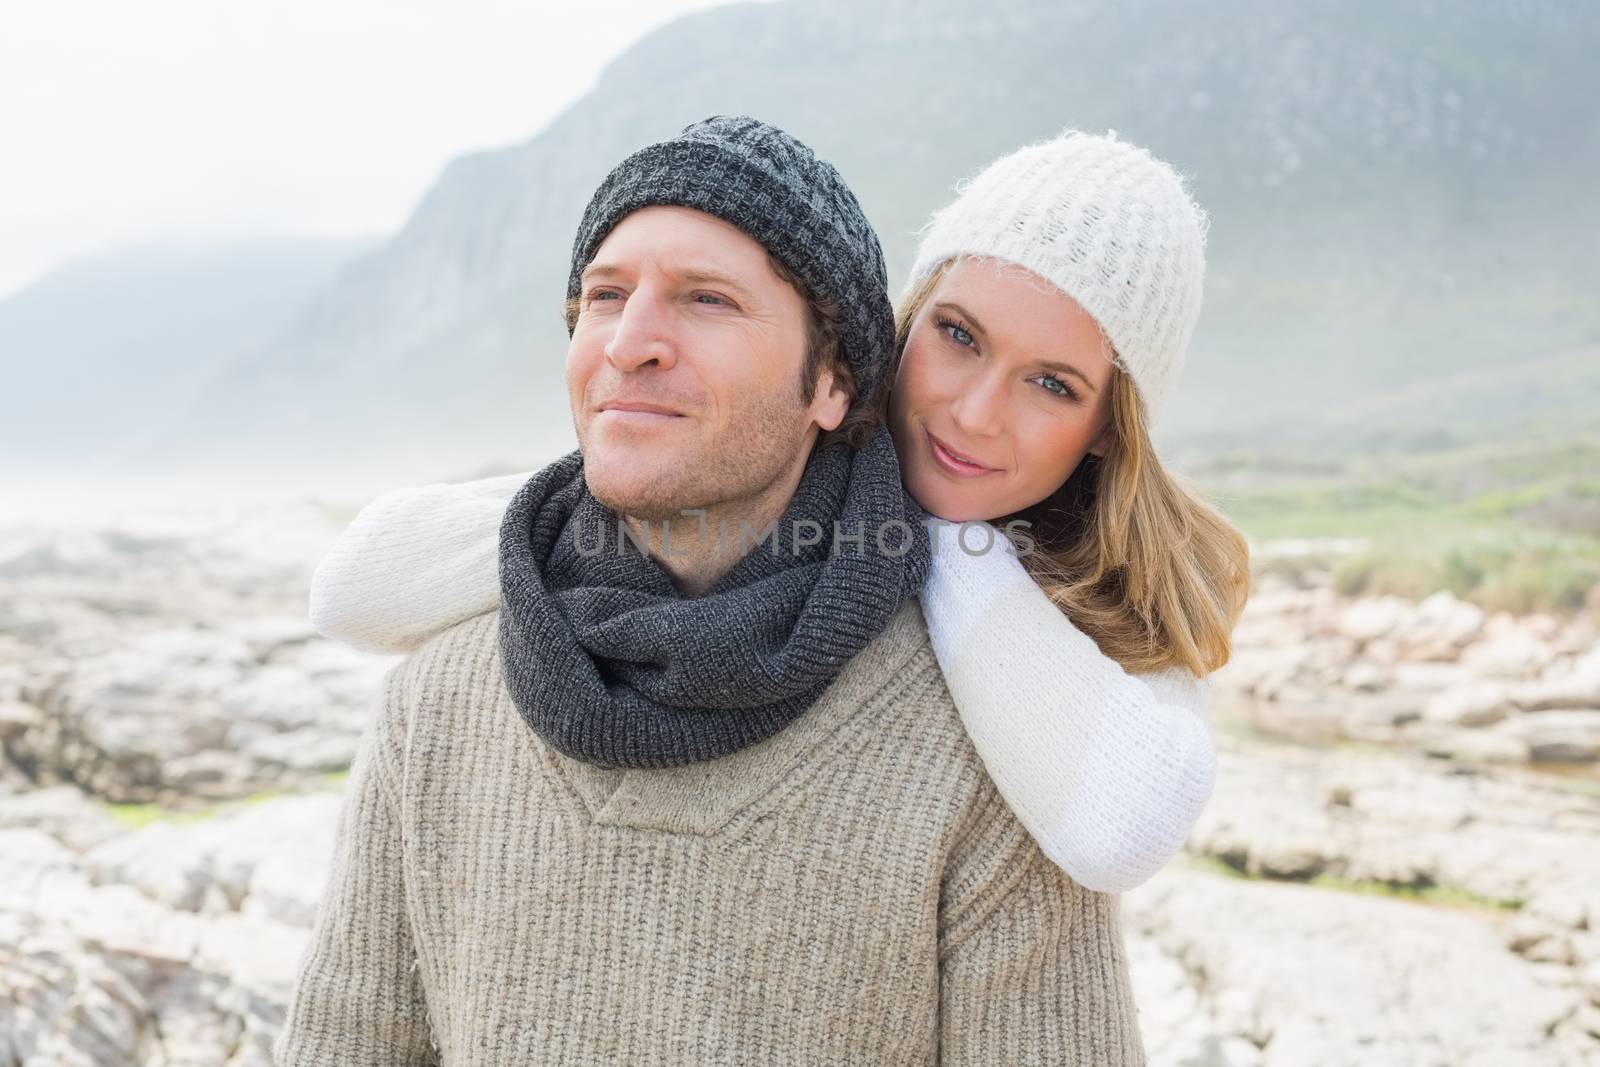 Romantic young couple together on a rocky landscape by Wavebreakmedia